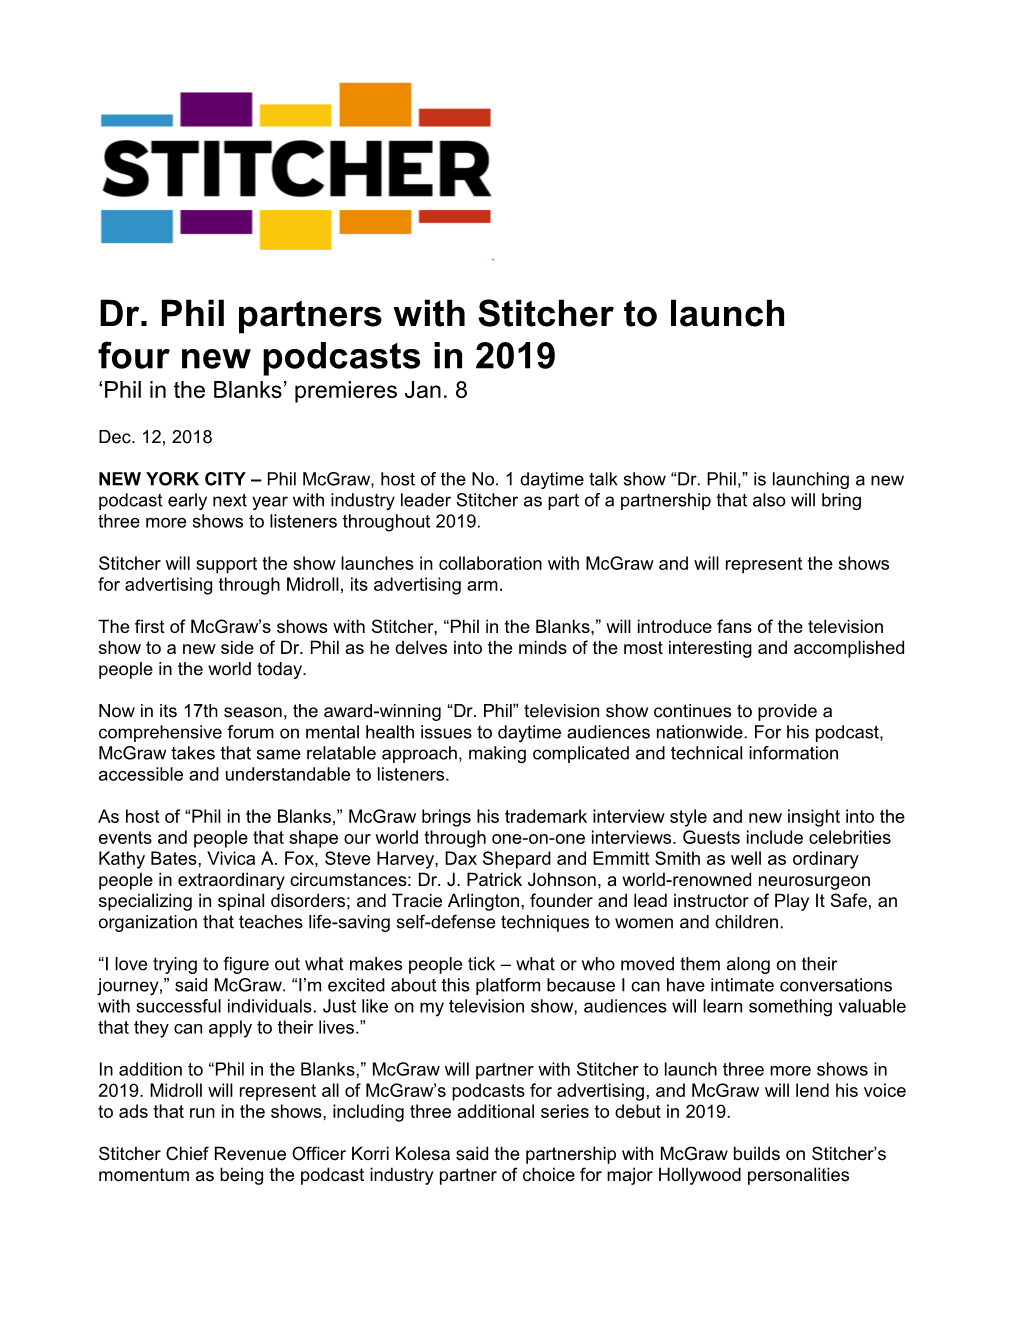 Dr. Phil Partners with Stitcher to Launch Four New Podcasts in 2019 ‘Phil in the Blanks’ Premieres Jan